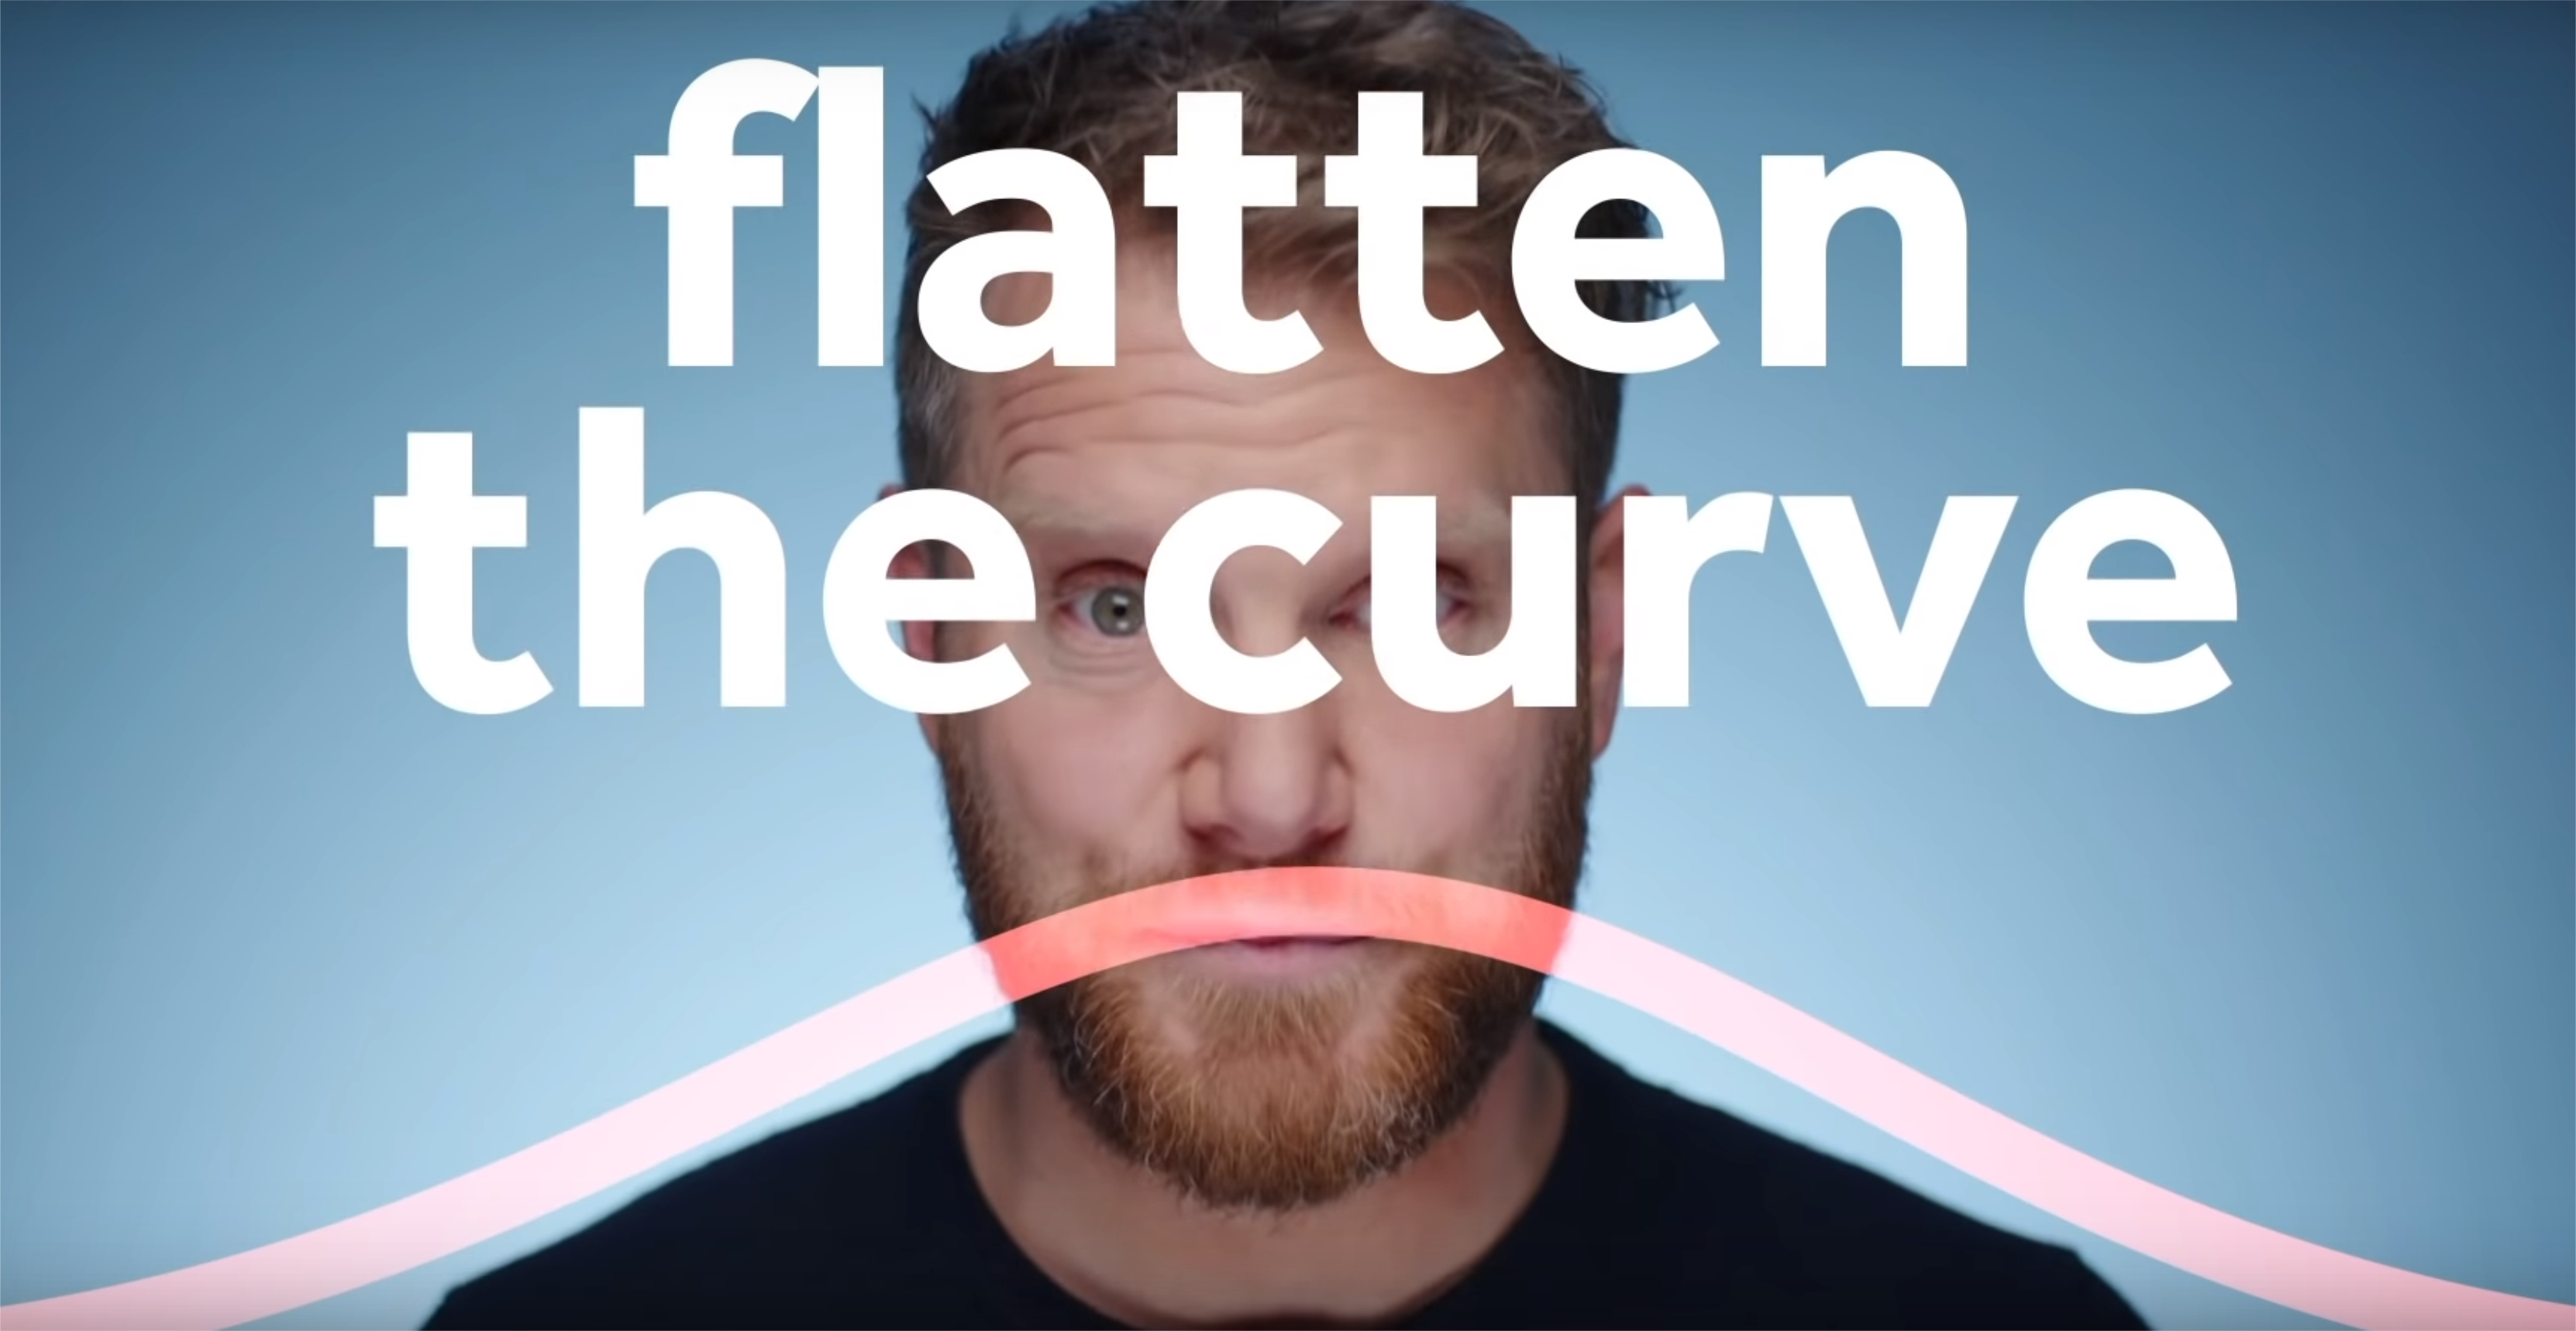 Flatten the curve, and spread the word!